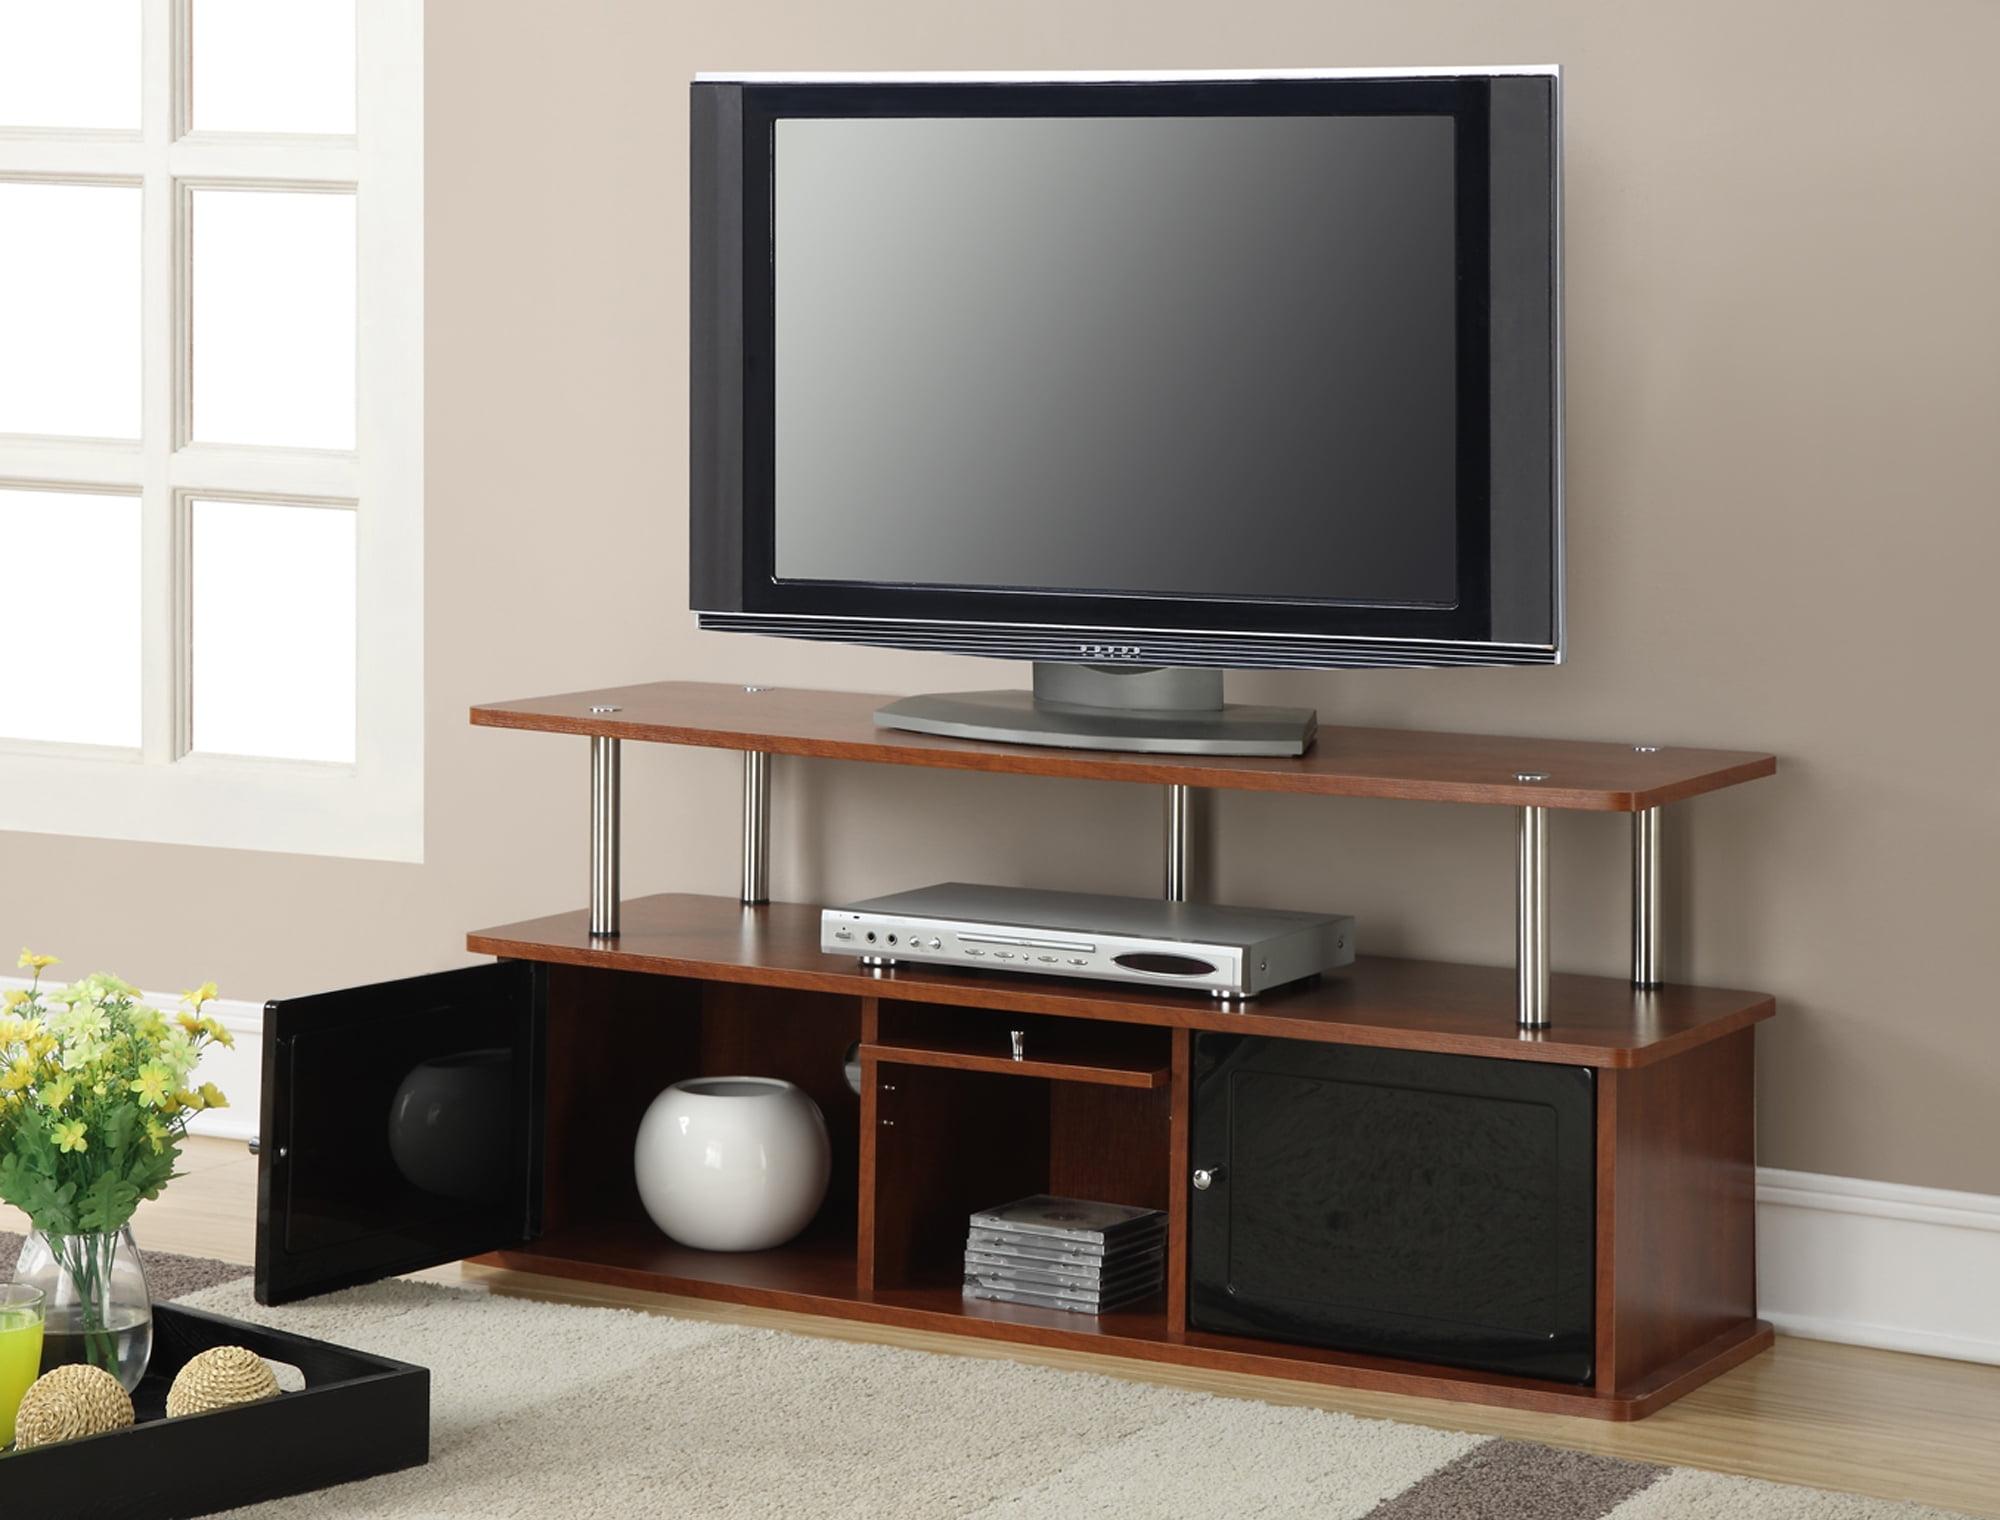 Designs2Go 50-inch Cherry Composite Wood TV Stand with Storage Cabinets